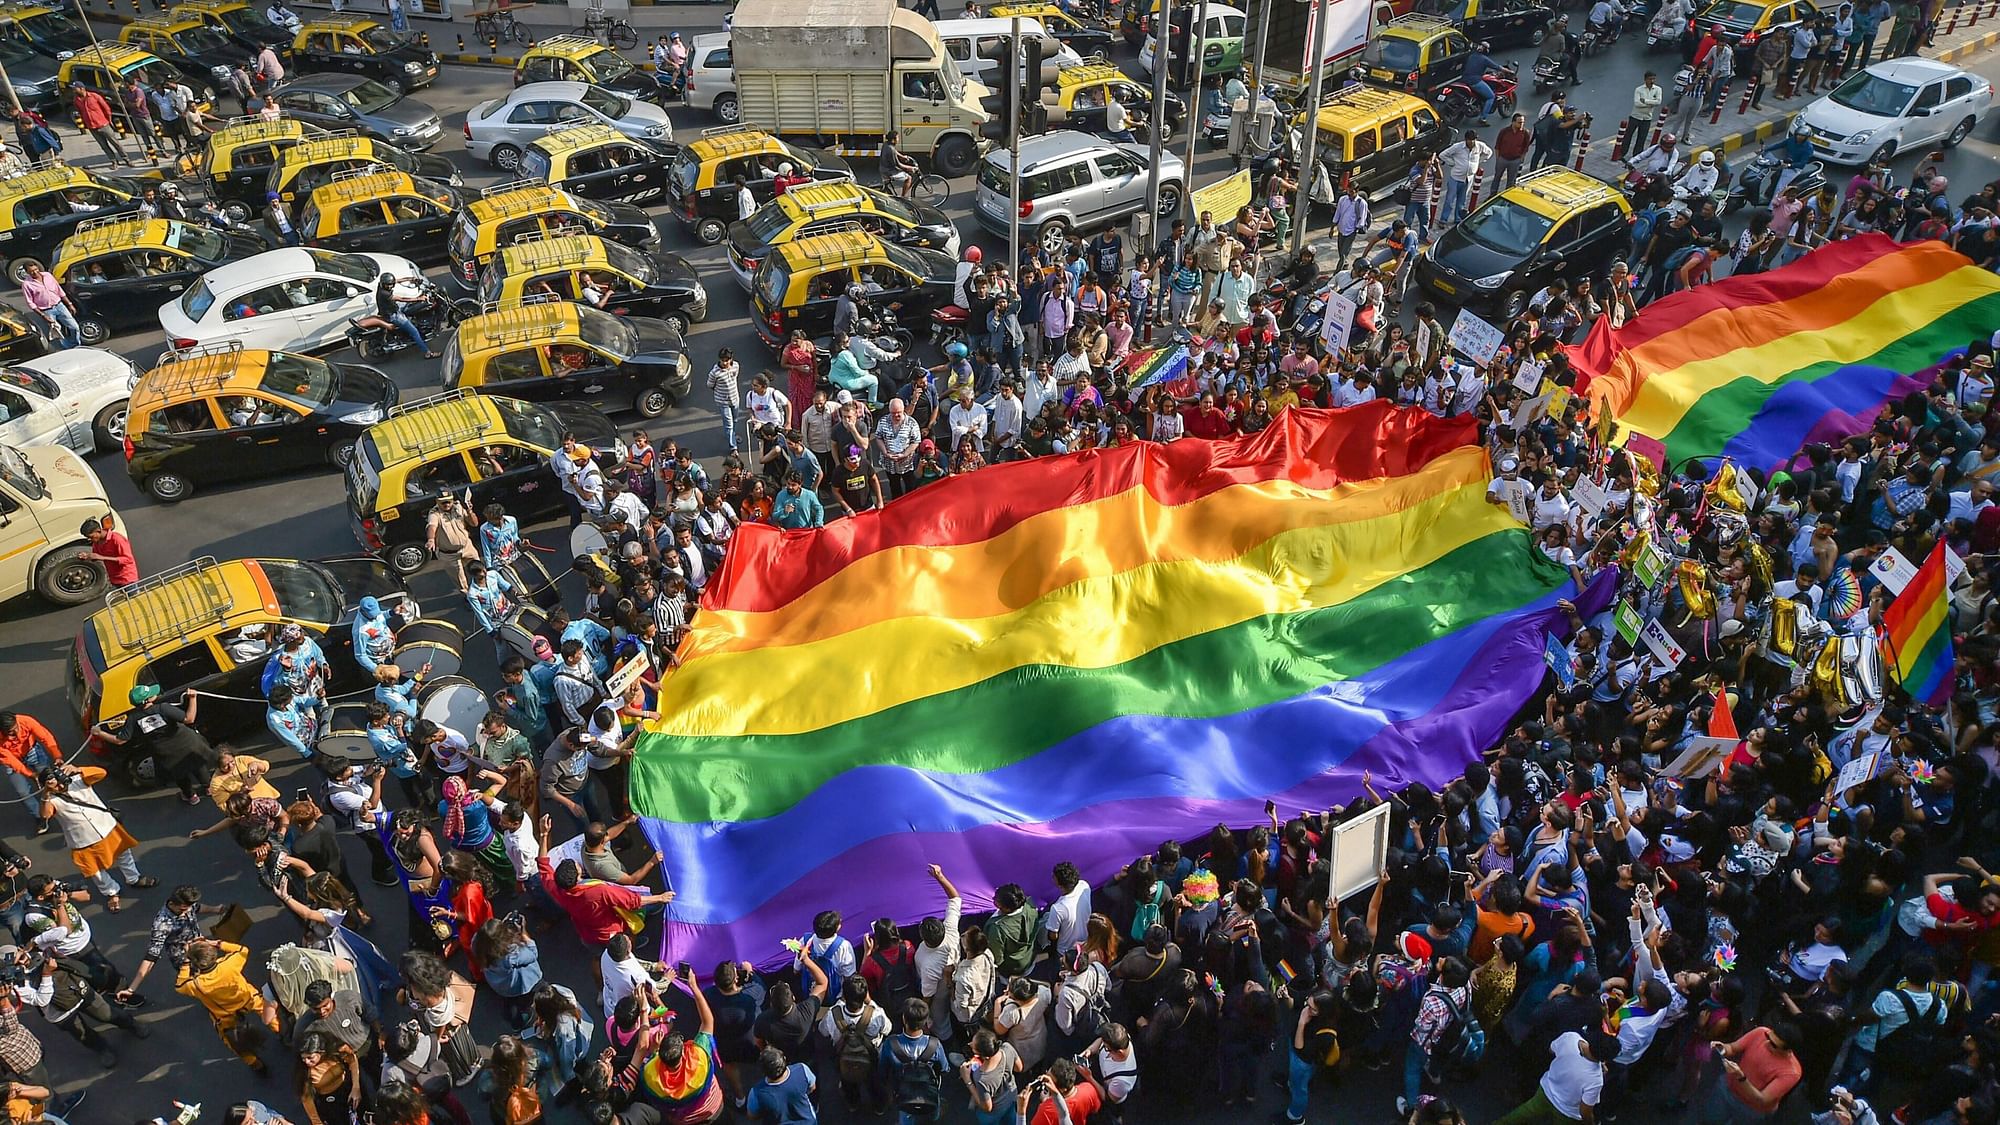 Members of the LGBTQ community participate in a pride parade in Mumbai on 2 February. Image used for representation purpose.